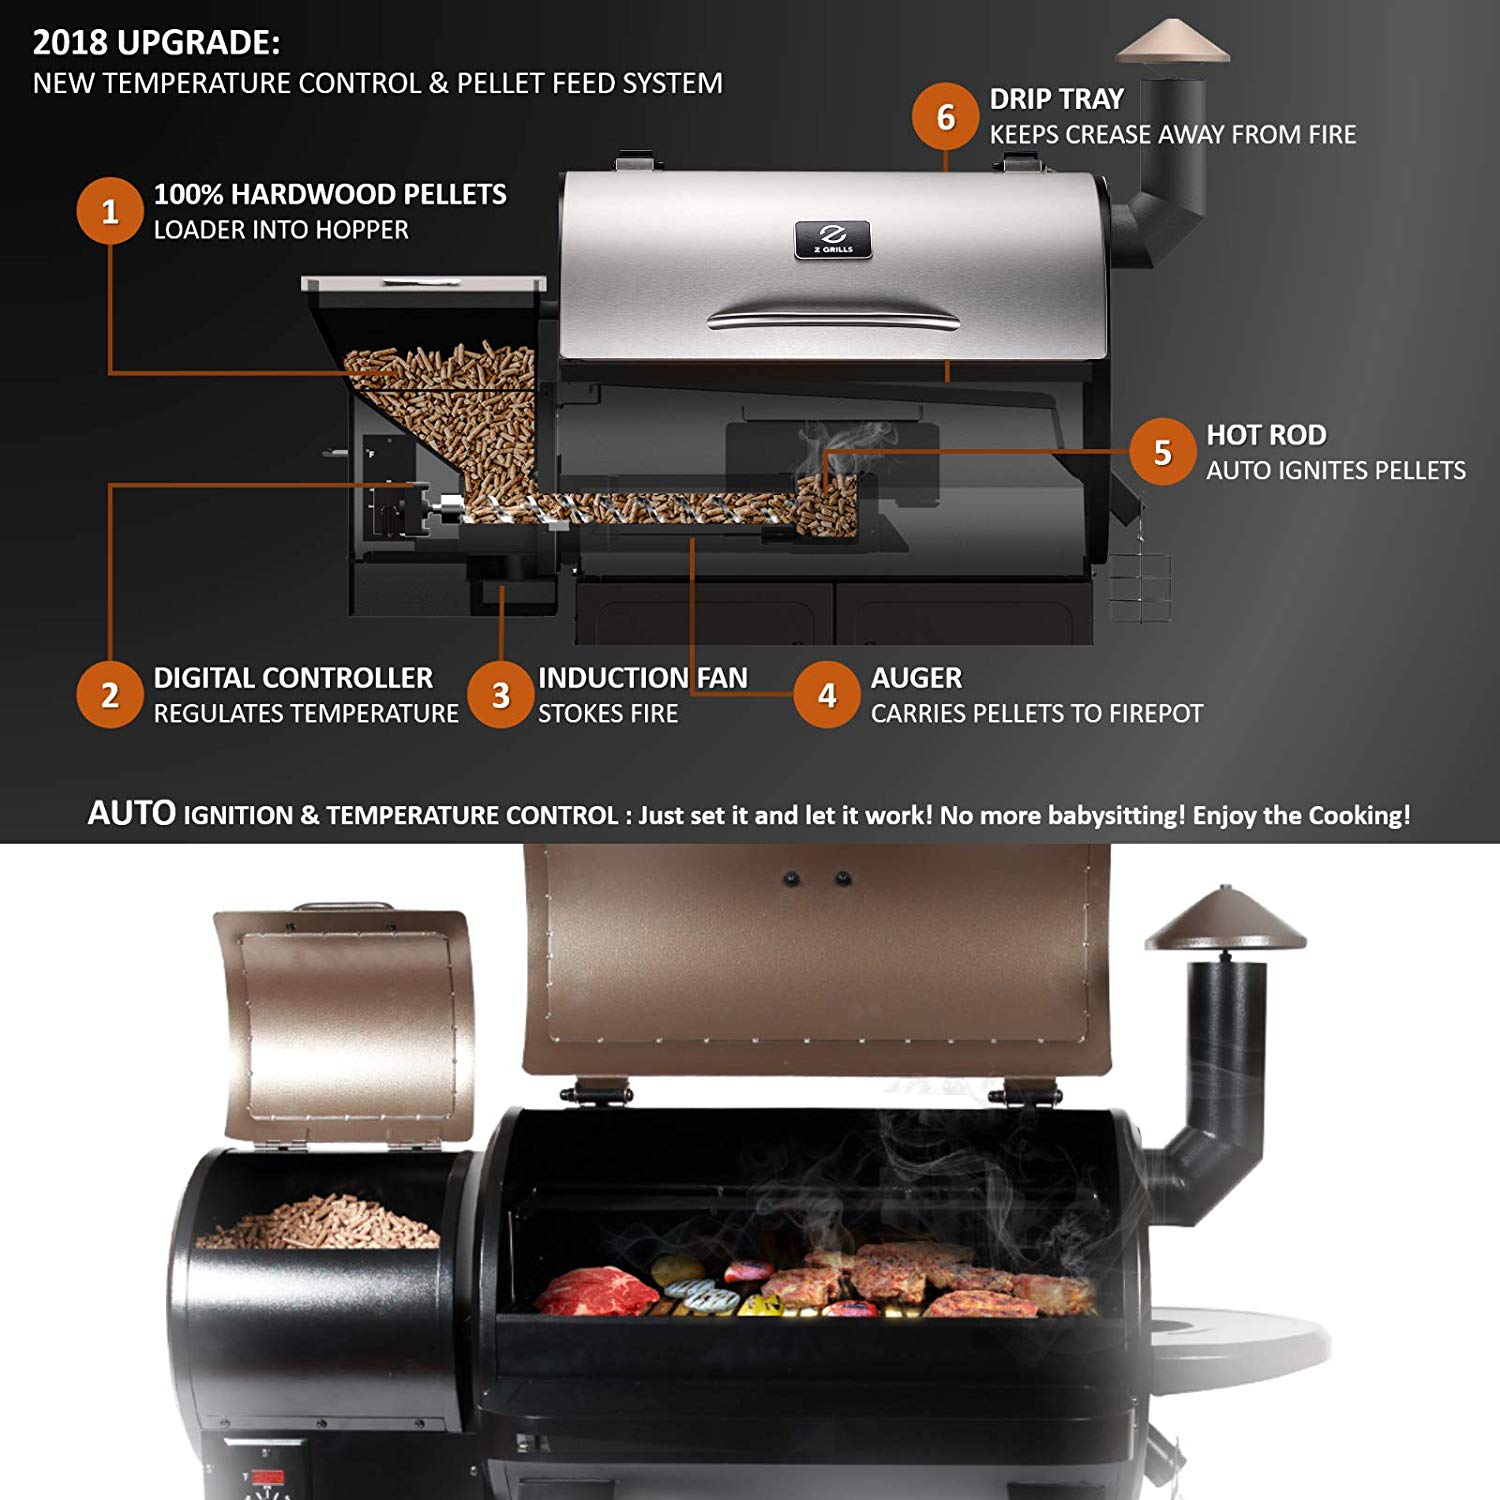 Z GRILLS ZPG-7002E 2019 New Model Wood Pellet Smoker, 8 in 1 BBQ Grill Auto Temperature Control, 700 sq inch Cooking Area, Silver Cover Included - image 4 of 7